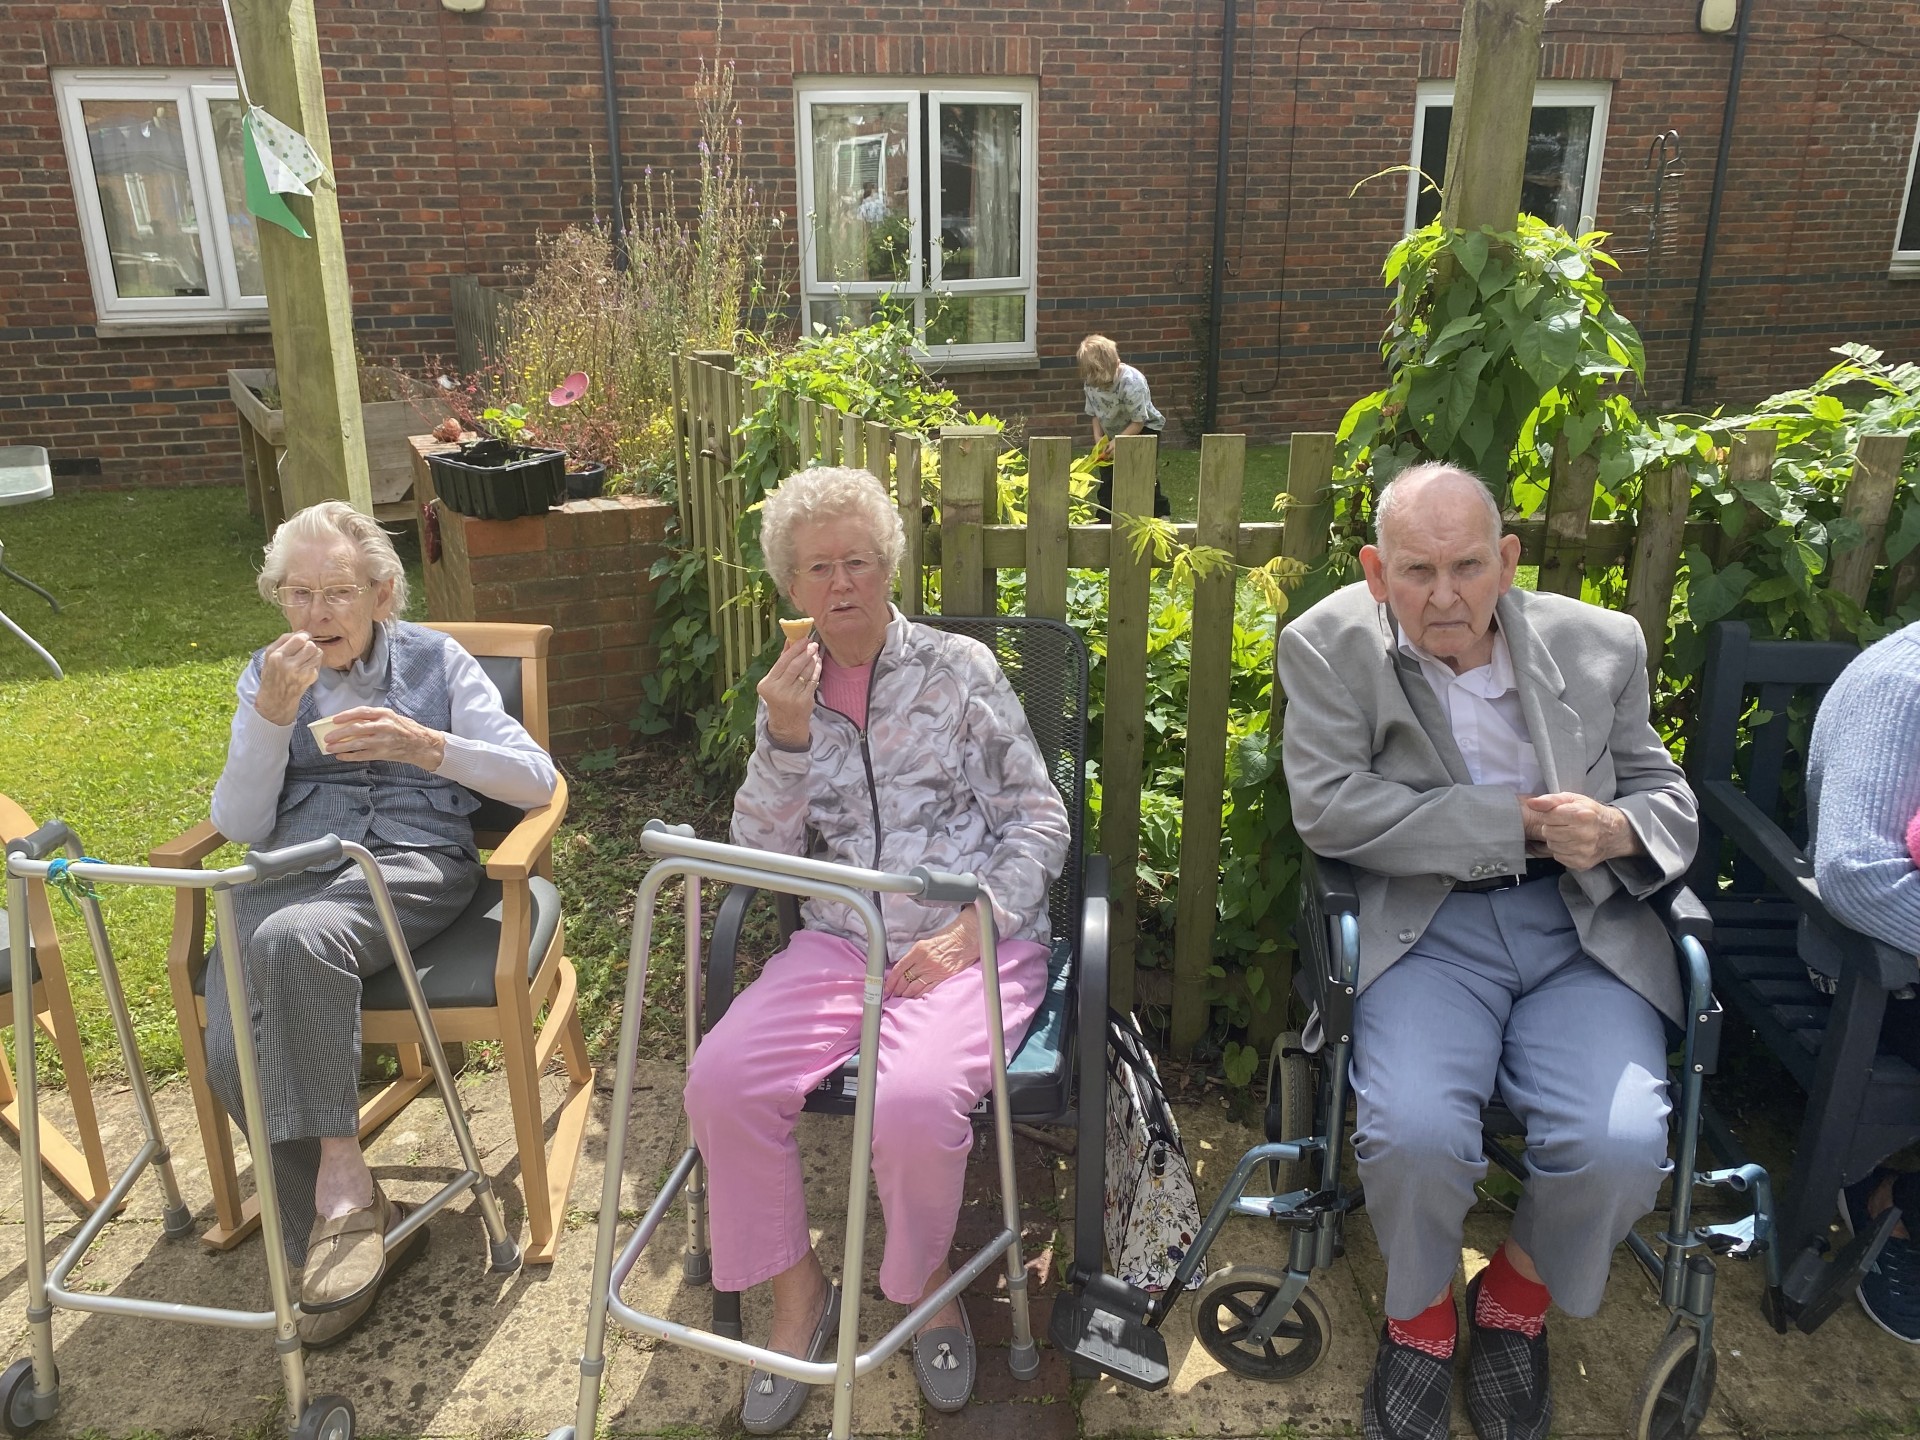 three older people, two ladies and a man are sitting down on chairs outside and eating an ice cream